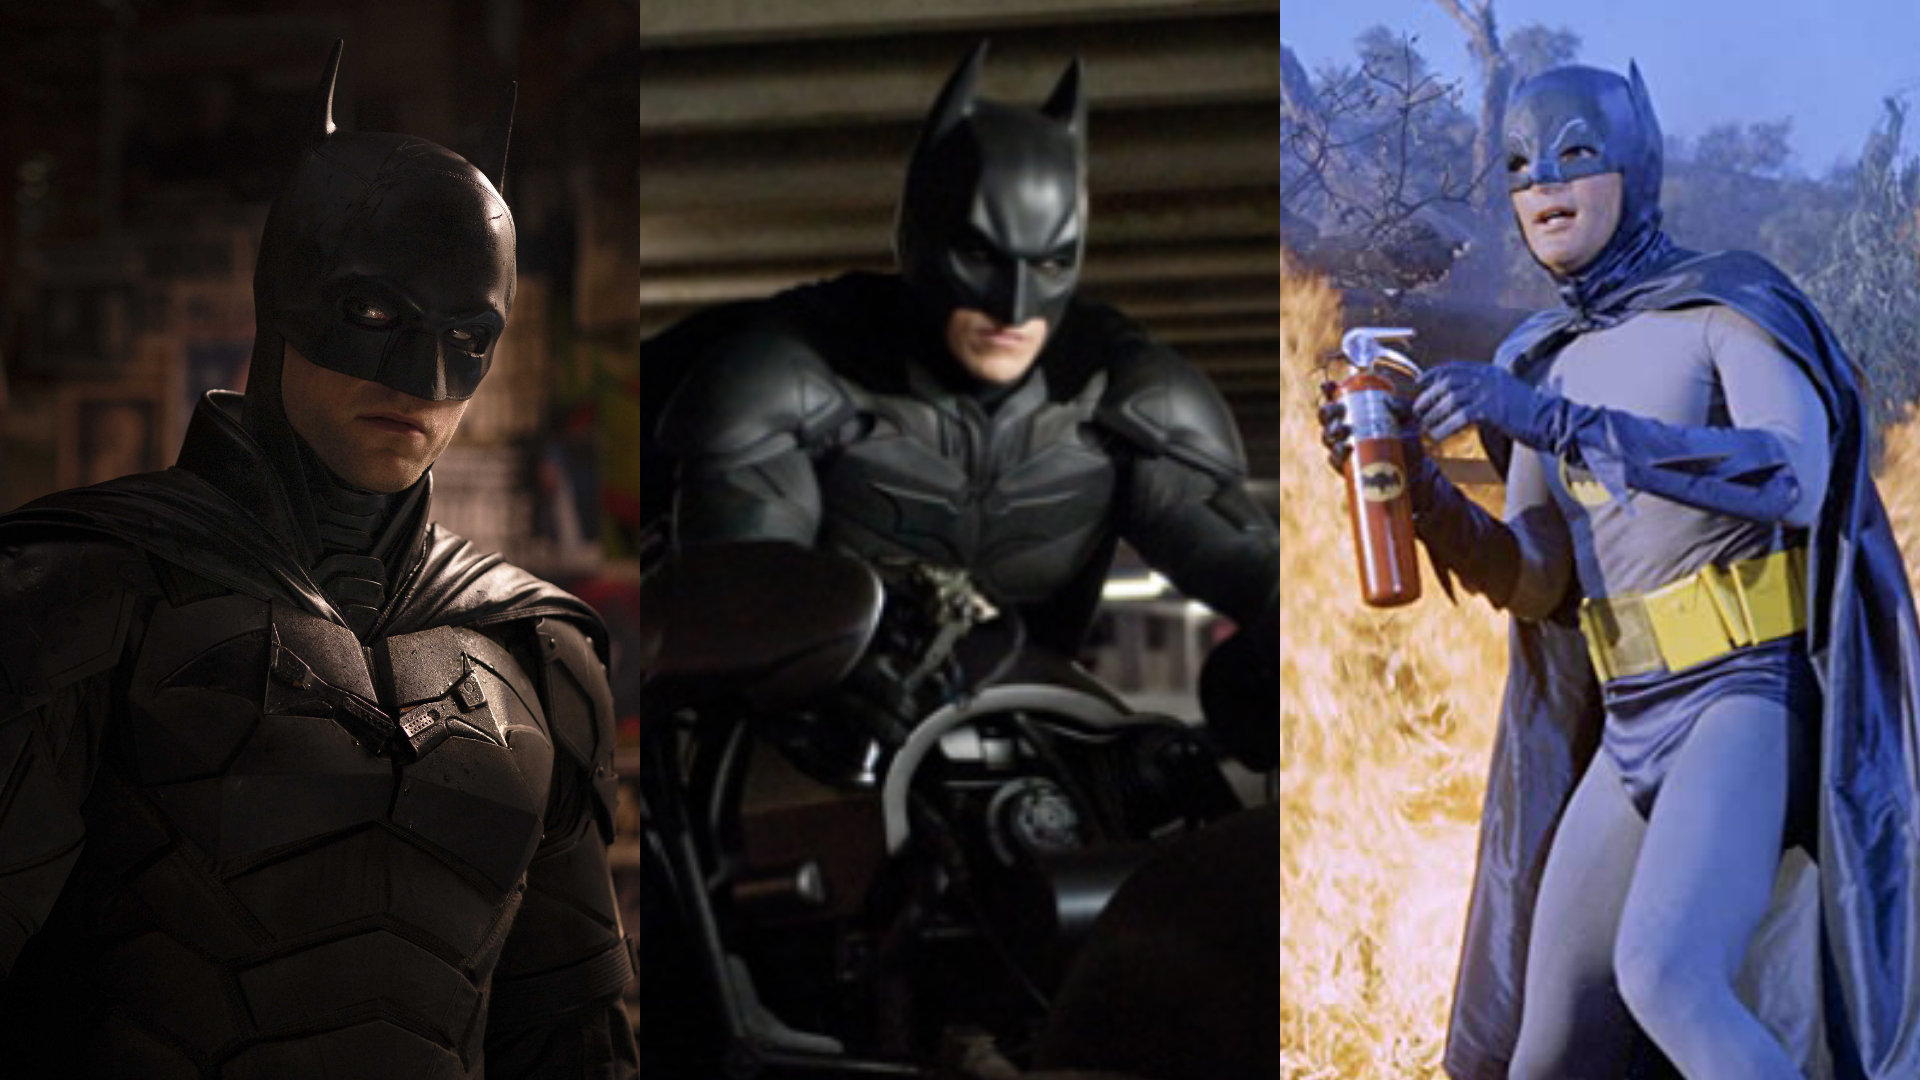 With 'The Batman' starring Robert Pattinson being released worldwide, we look back at the other movies in which DC Comics’s Caped Crusader takes centre stage. All photos: Warner Bros, unless otherwise specified